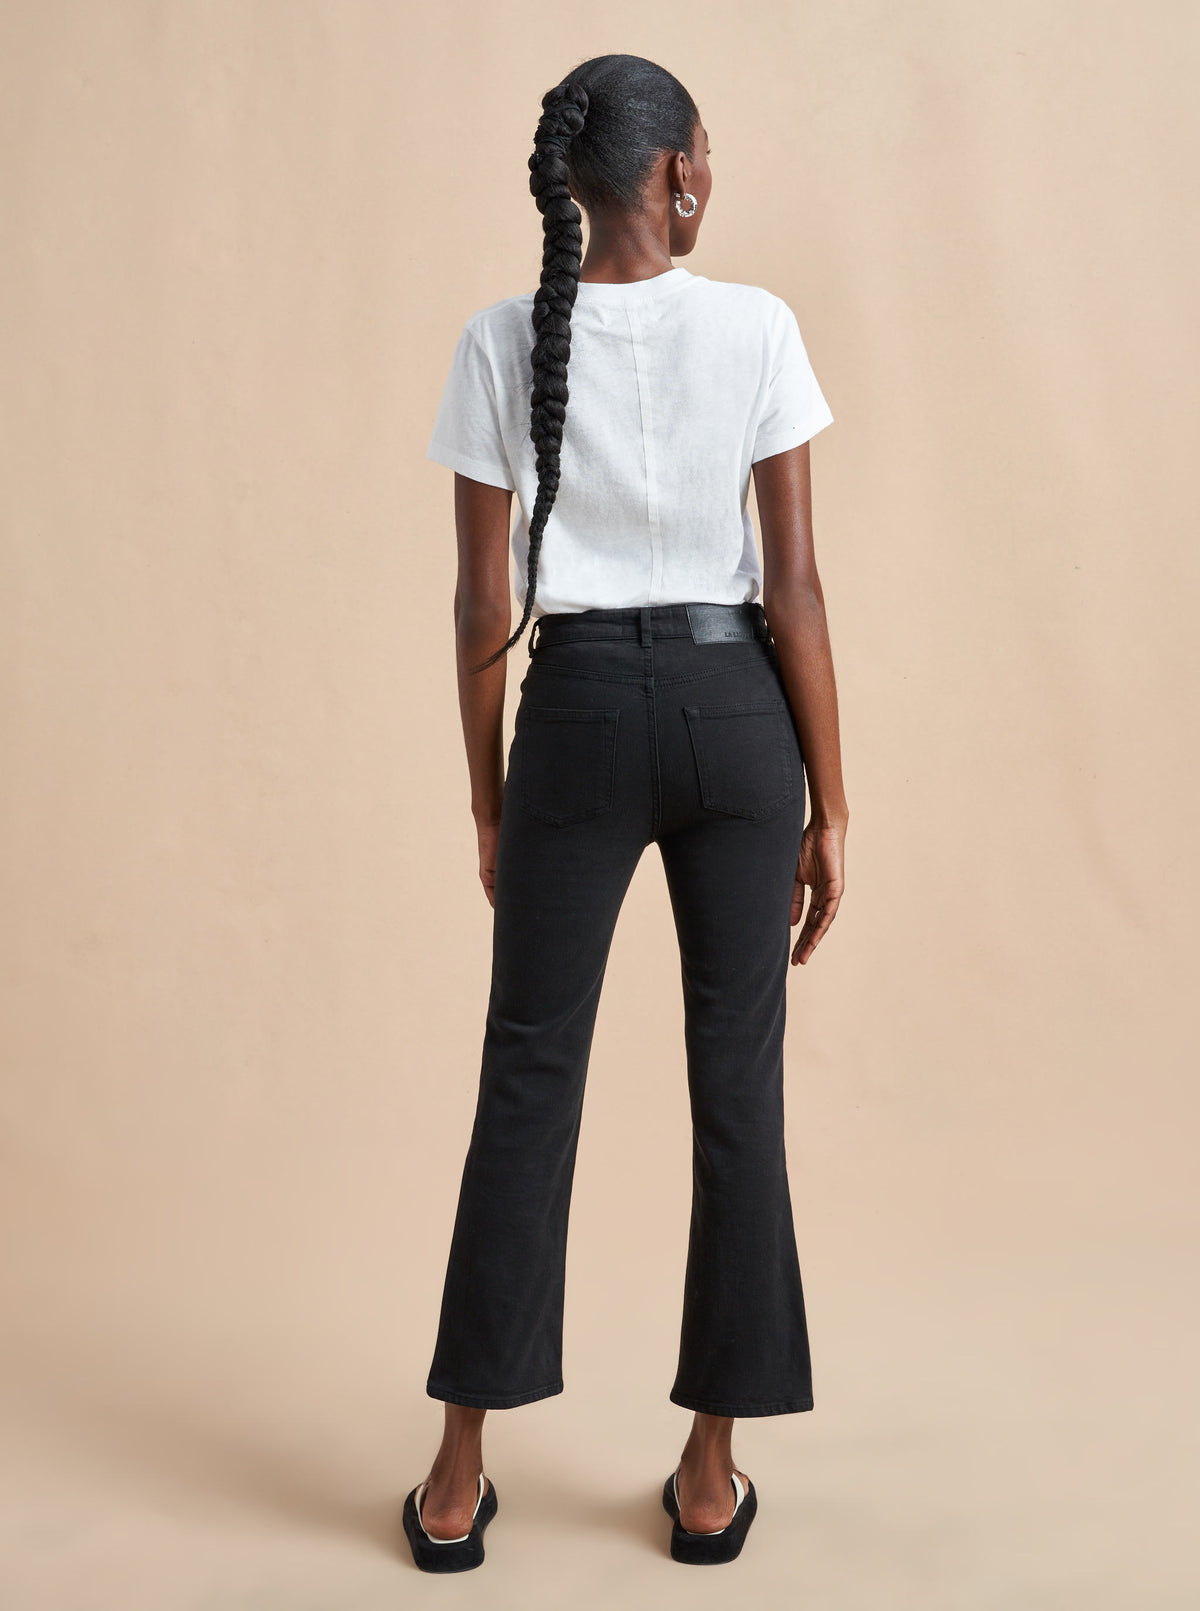 The Meredith Jean is that perfect friend you can't live without. From boots to Birkenstocks, this flattering, high rise, cropped, flare jean makes you look and feel your best with a hint of je ne sais quoi-just like the co-founder herself. 